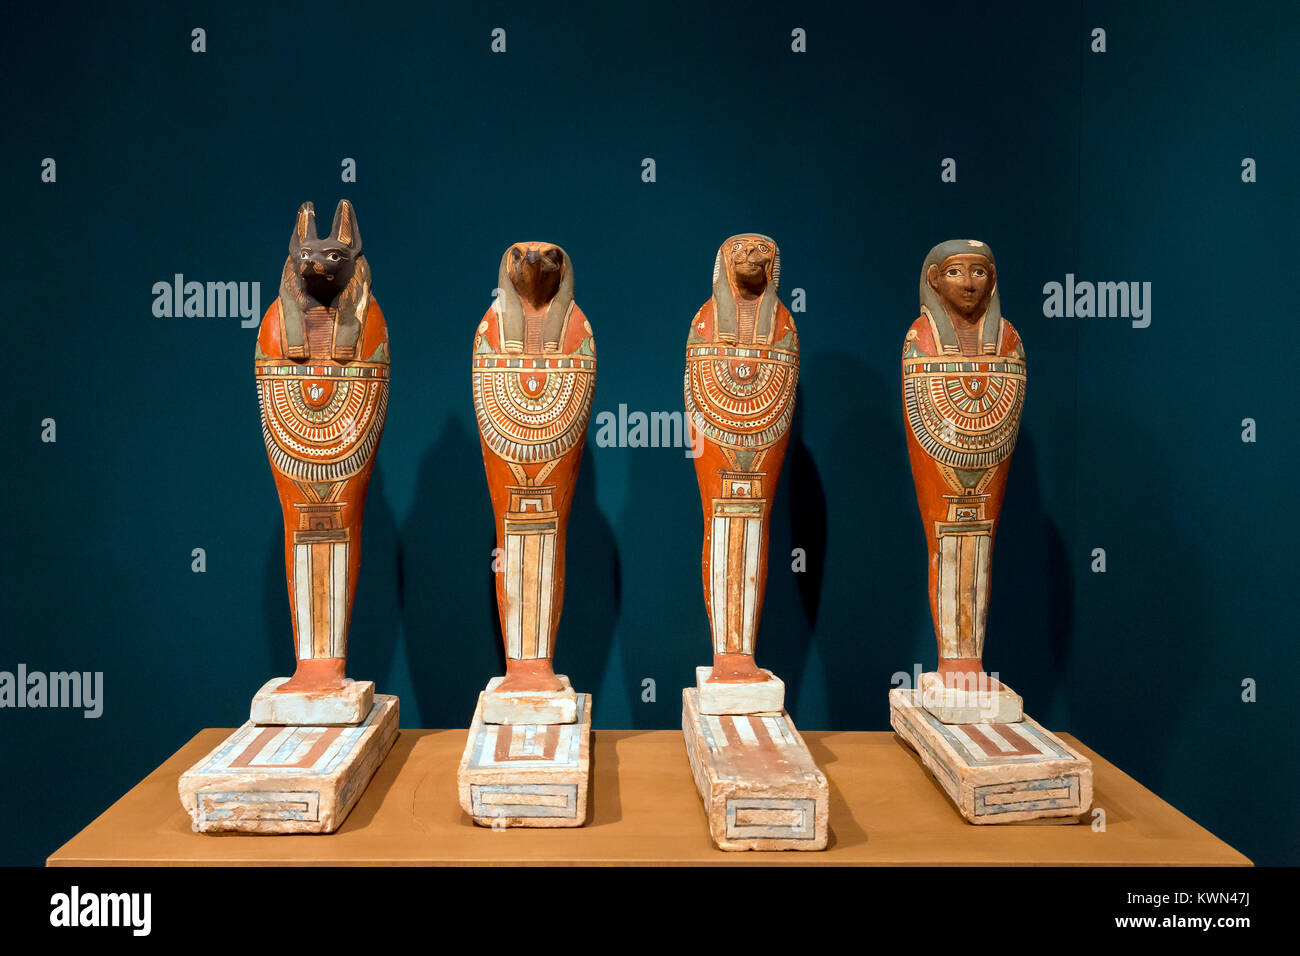 Statuettes of the Four Sons of Horus, Late Period, Ptolemaic Period, Metropolitan Museum of Art, Manhattan, New York City, USA, North America Stock Photo